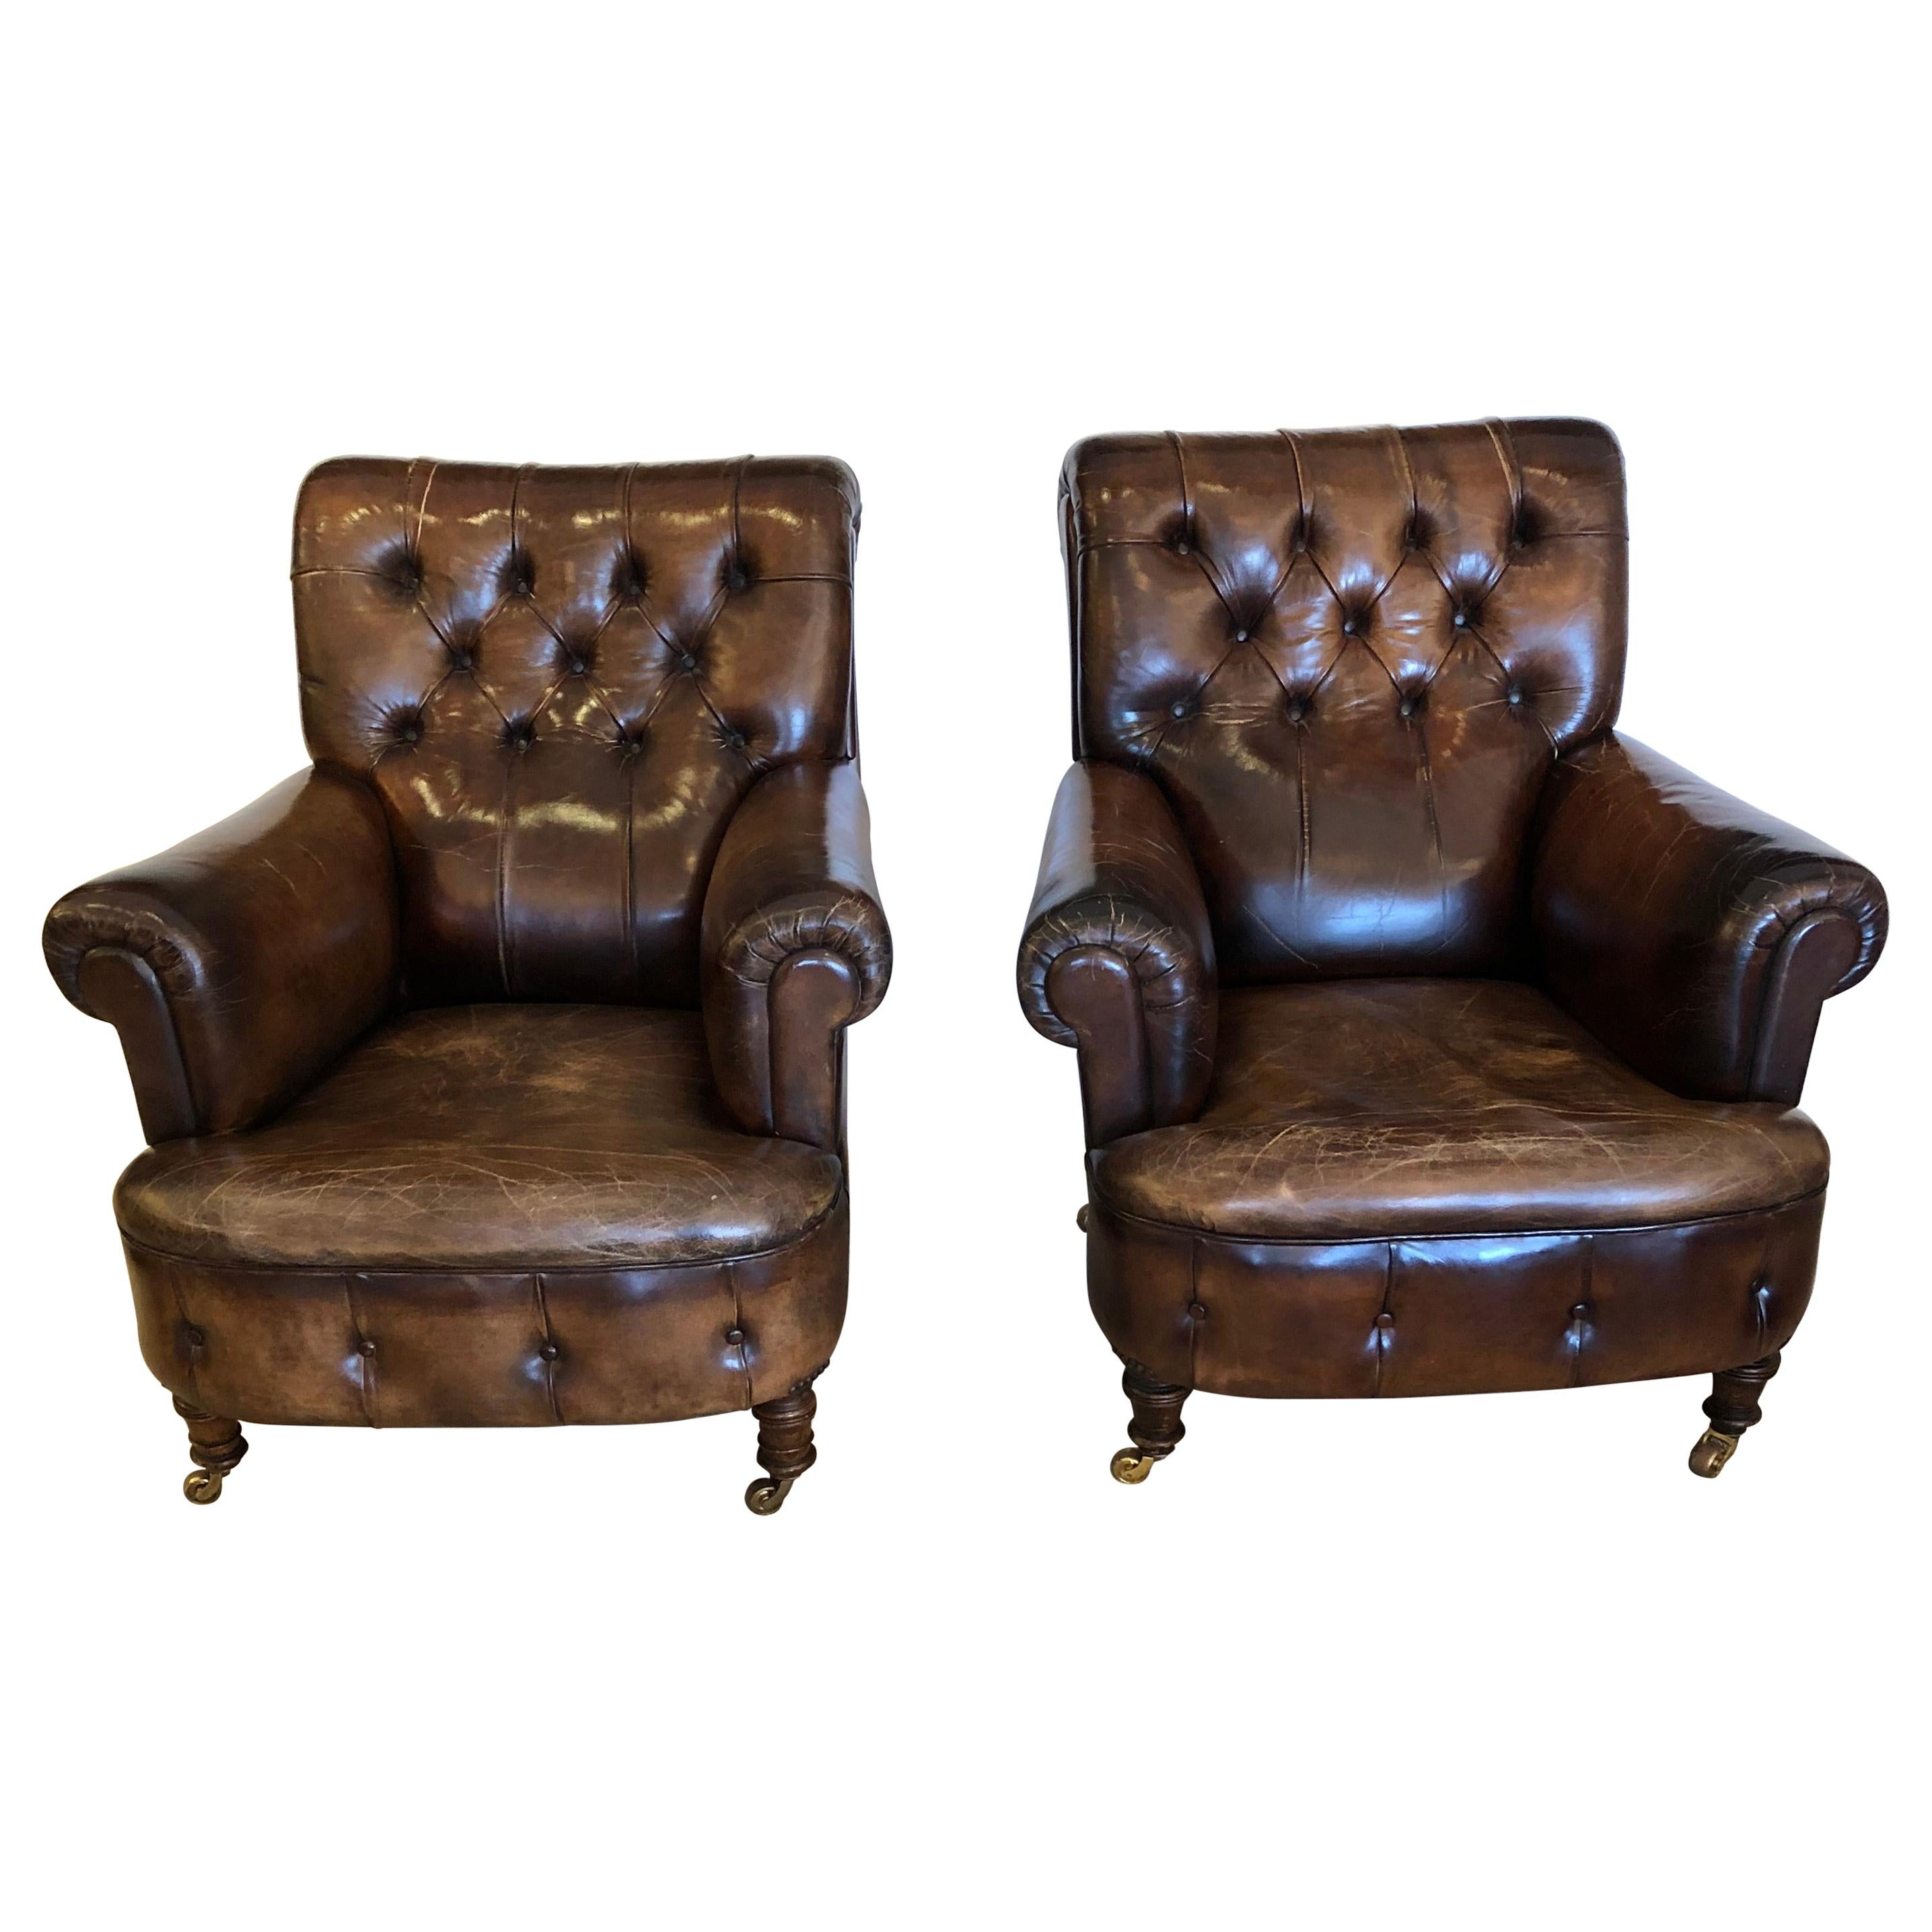 Rare Pair of 19th Century Tobacco Leather Tufted Club Chairs